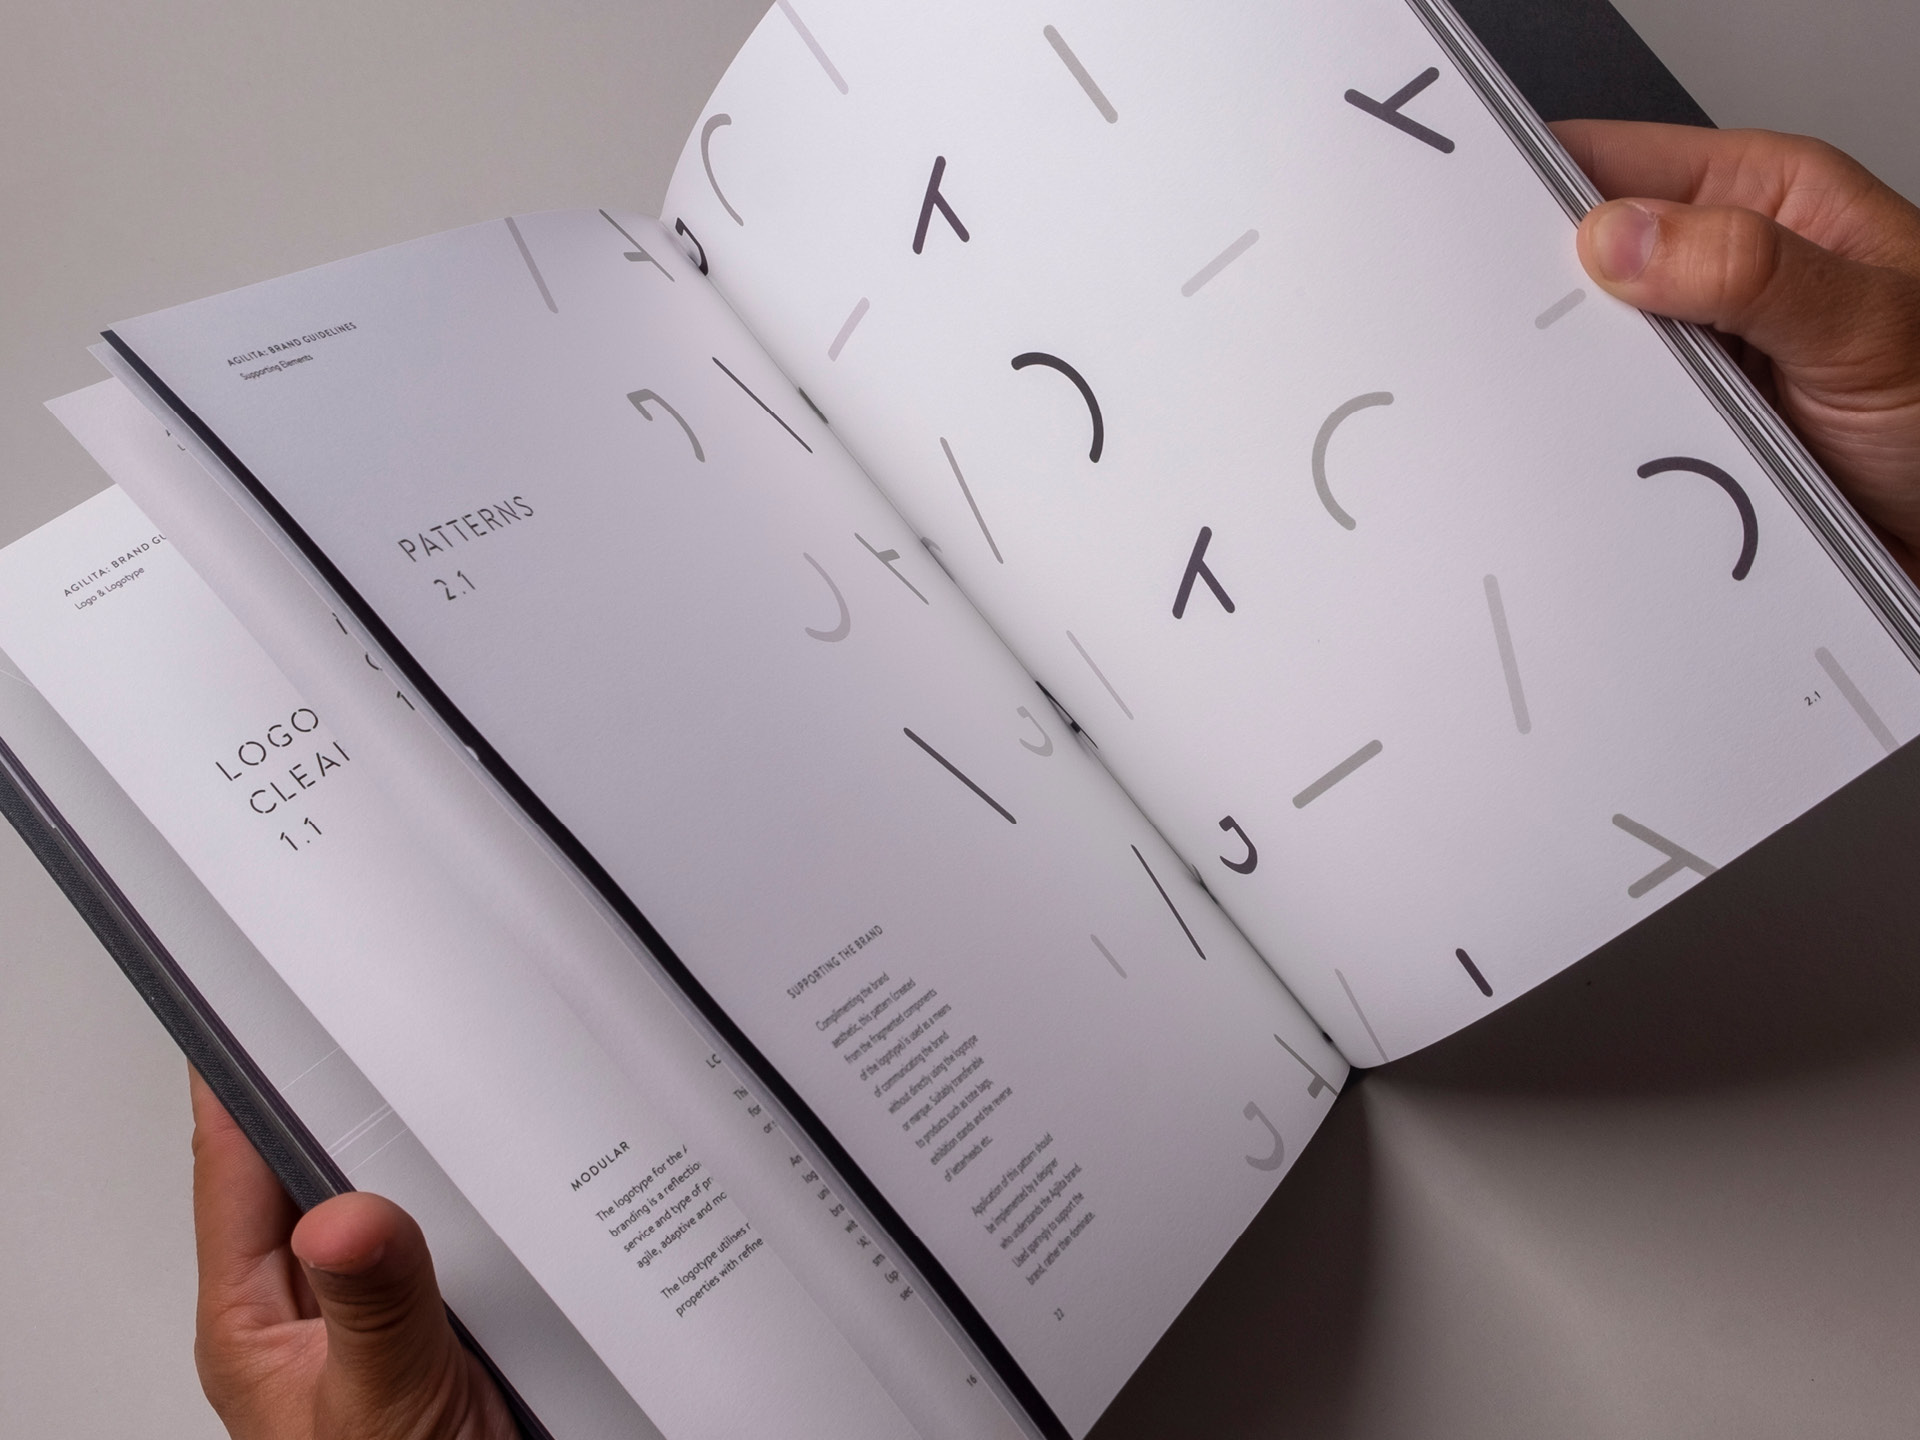 Flicking through the pages of the brand guidelines book detailing the supporting brand pattern made from a deconstructed logotype